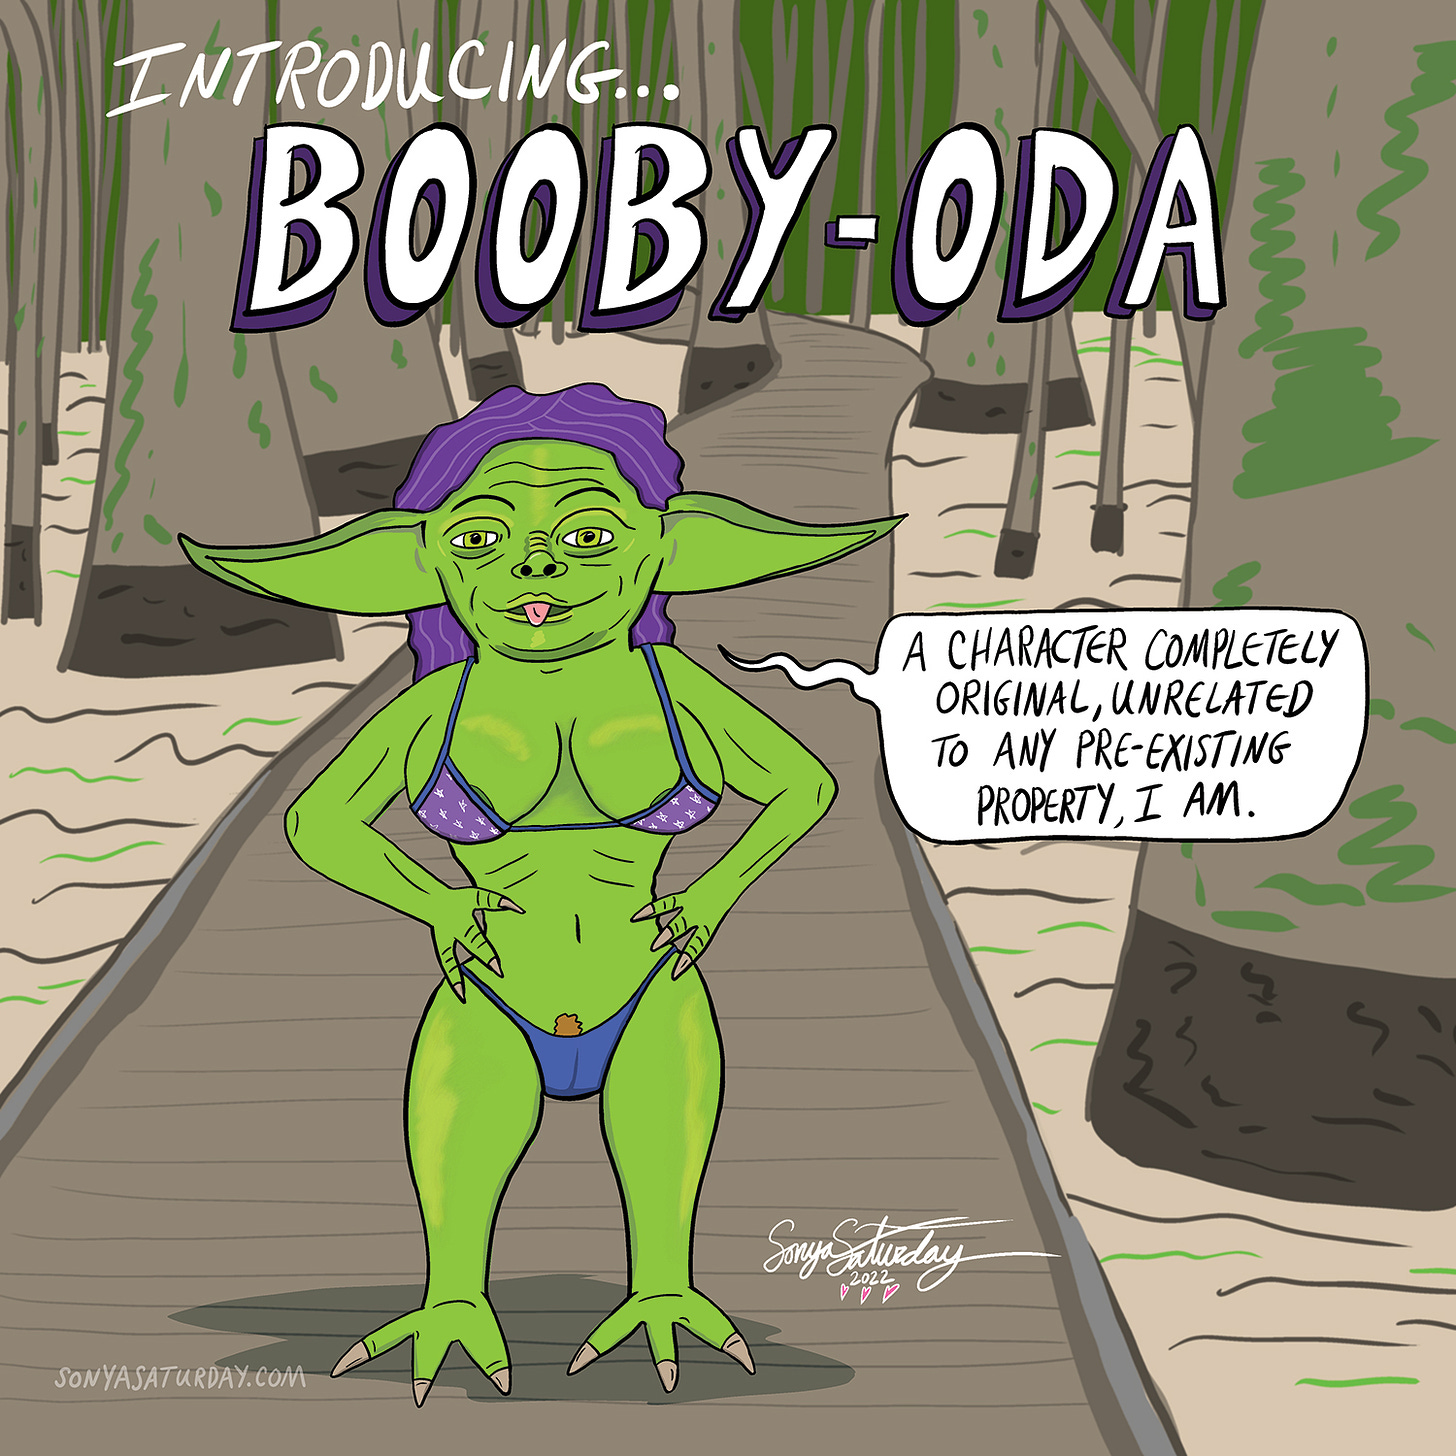 Colorful illustration of Booby-Oda, a completely original character with green skin, purple hair, and a bikini